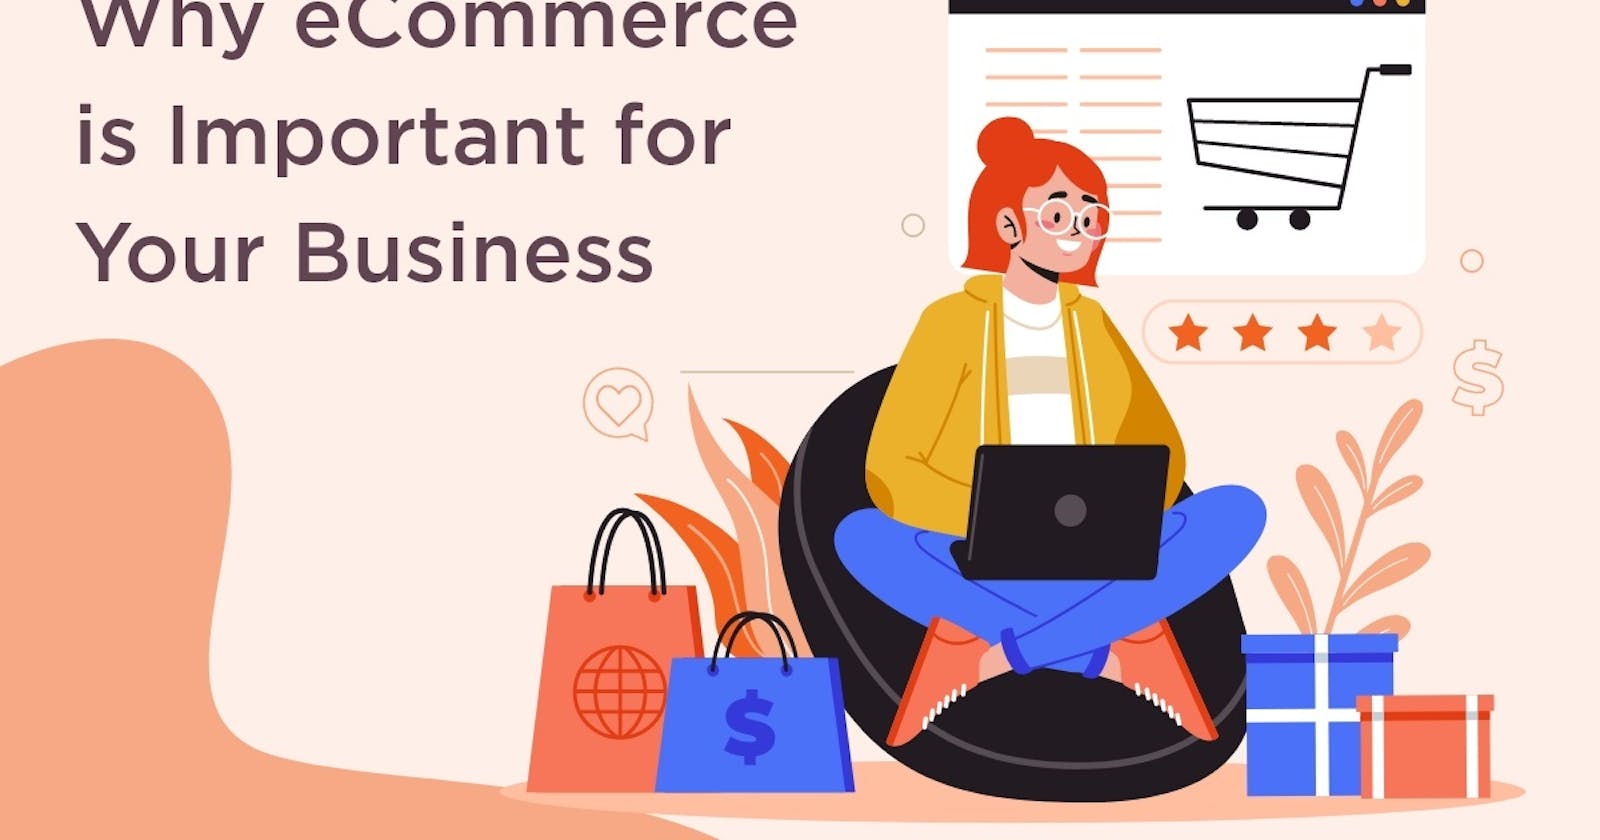 7 Benefits of eCommerce for Your Business